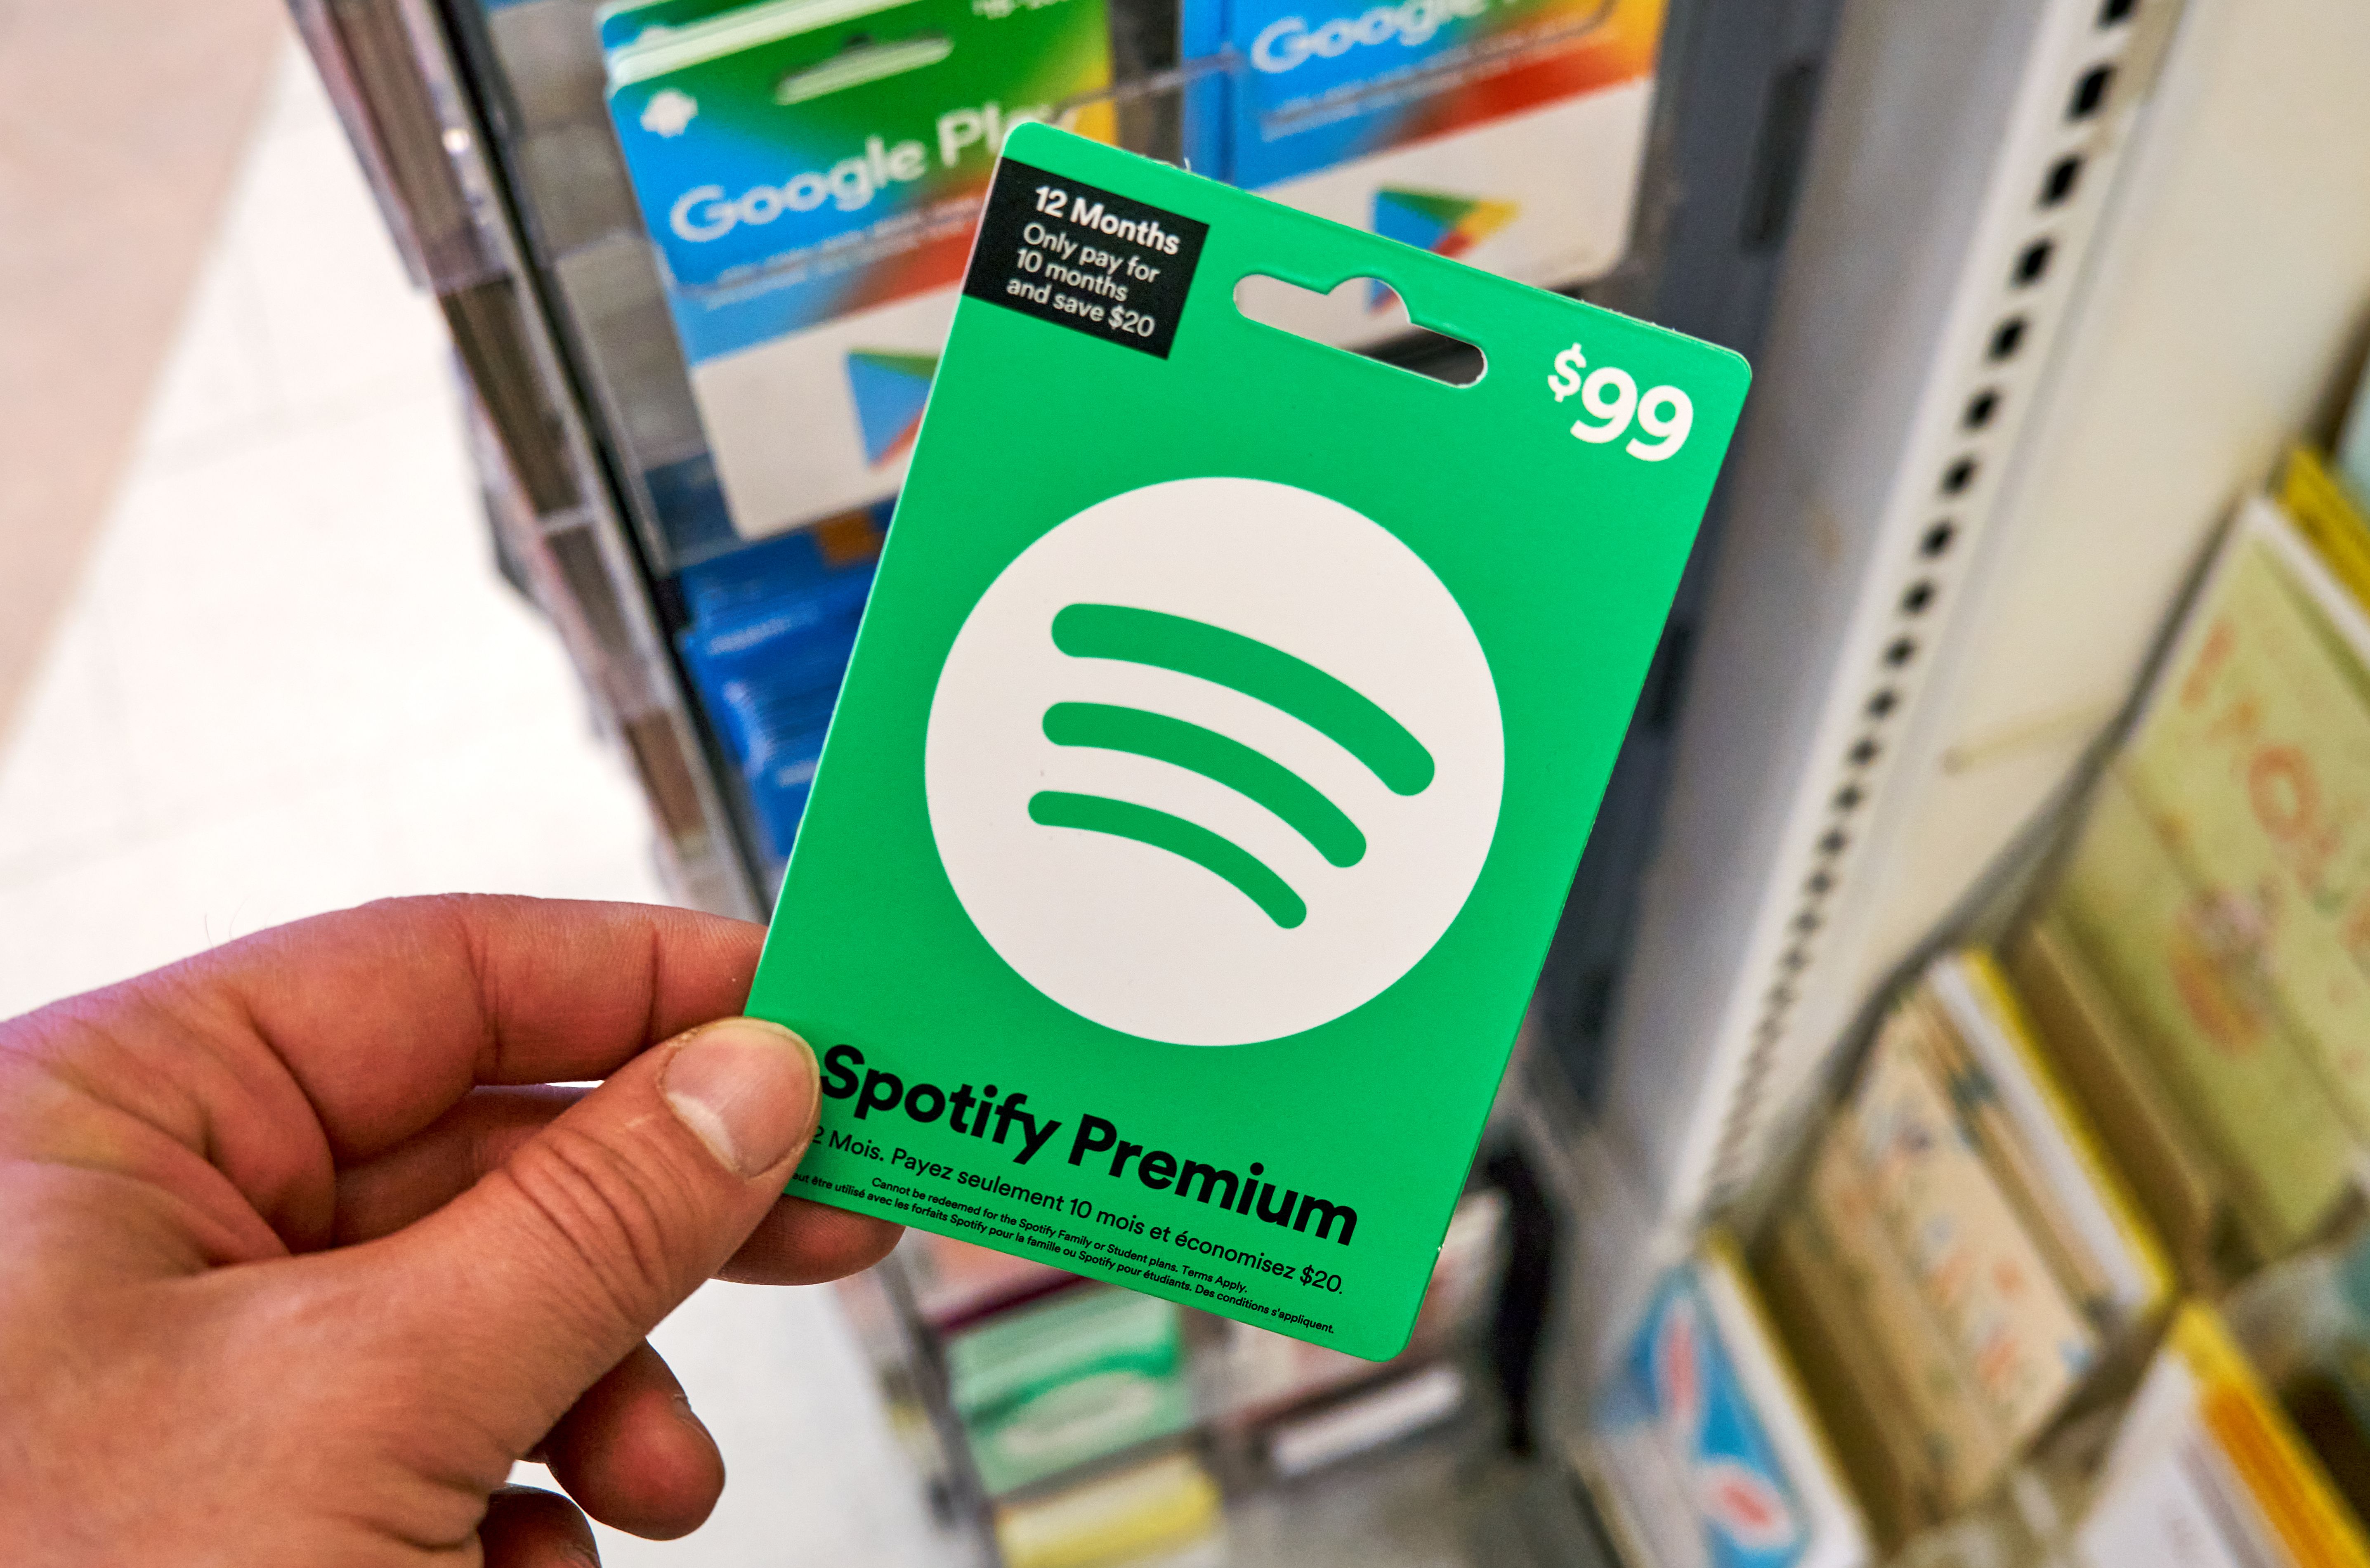 Someone holding a Spotify gift card in a shop